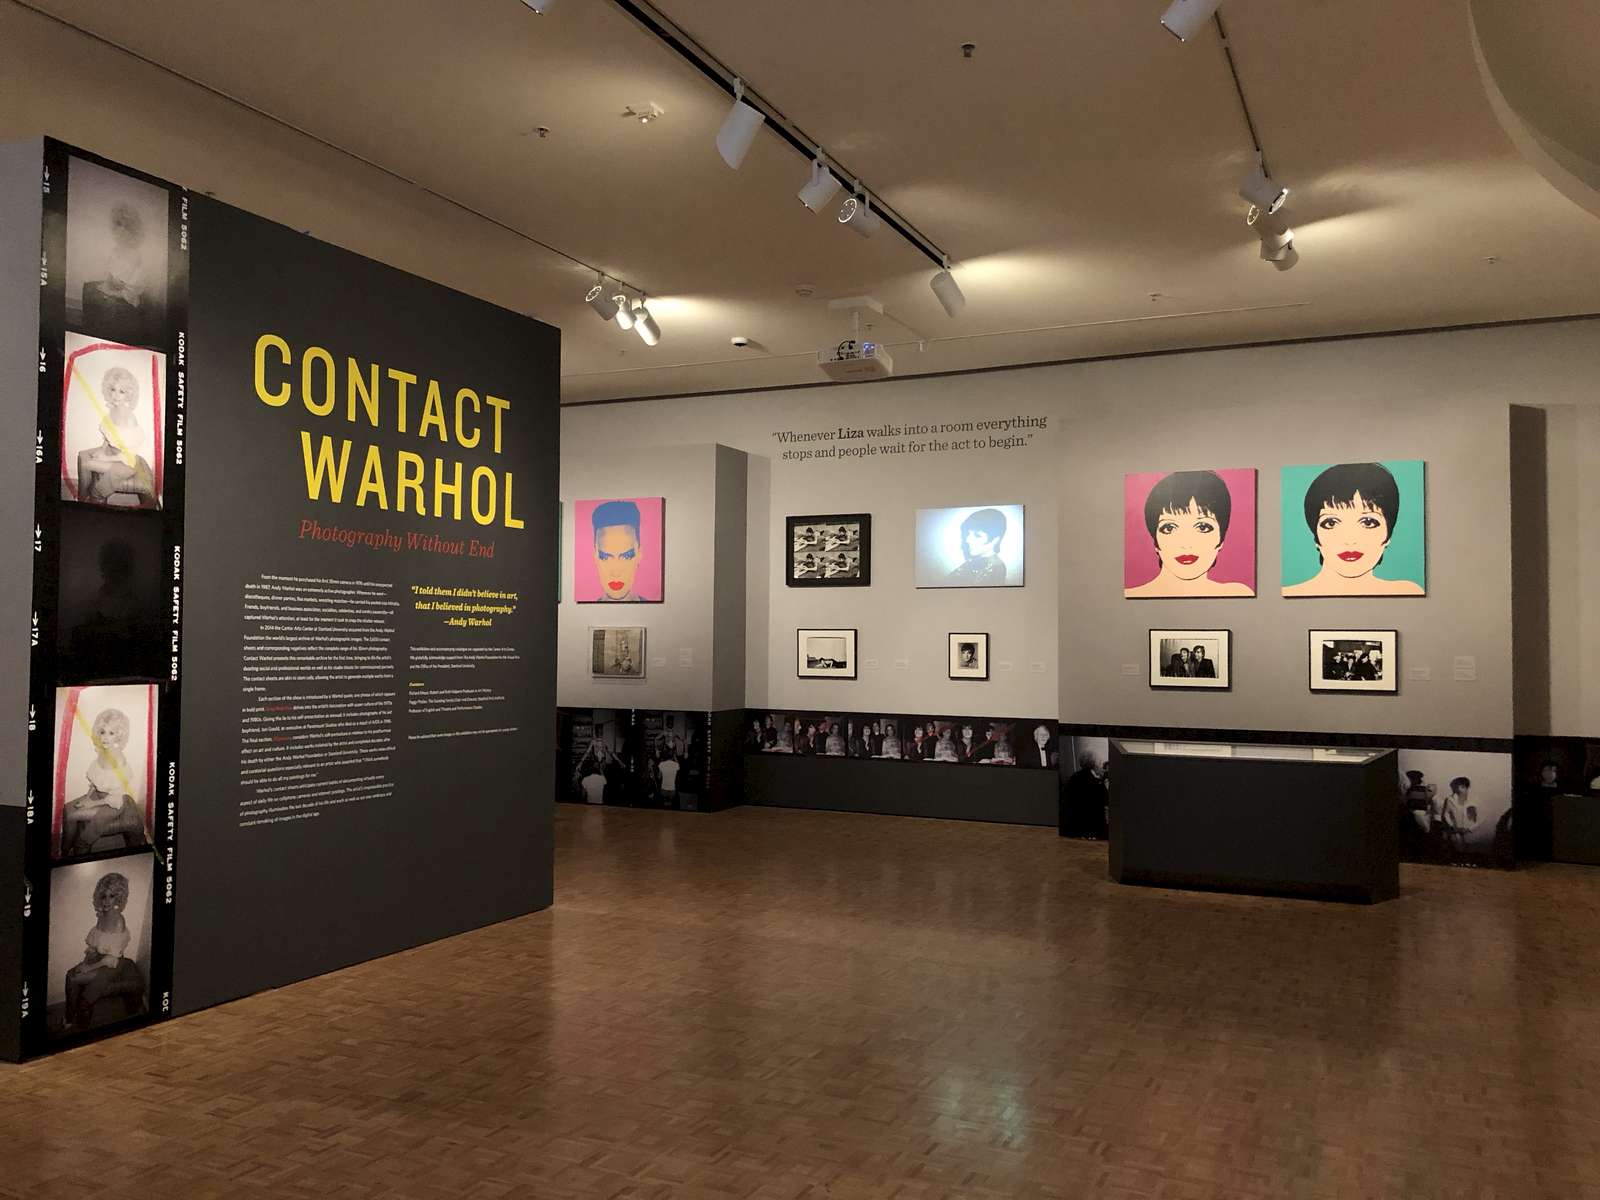 Contact Warhol: Photography Without End IKD oversaw all architectural and exhibition design elements including movable partitions, art display apparatus, layout of artwork, and graphic design for the project. IKD’s holistic, integrative approach to gallery design enabled a seamless visitor experience that considered issues of visitor flow, accessibility, spatial composition, and visual organization as well as the integration of several projected videos and an interactive table. The exhibition drew from a trove of over 3,600 original contact sheets revealing previously unseen photographic exposures for the first time, depicting intimate images of the artist’s daily life documenting everything from the mundane to his interaction with celebrities. 